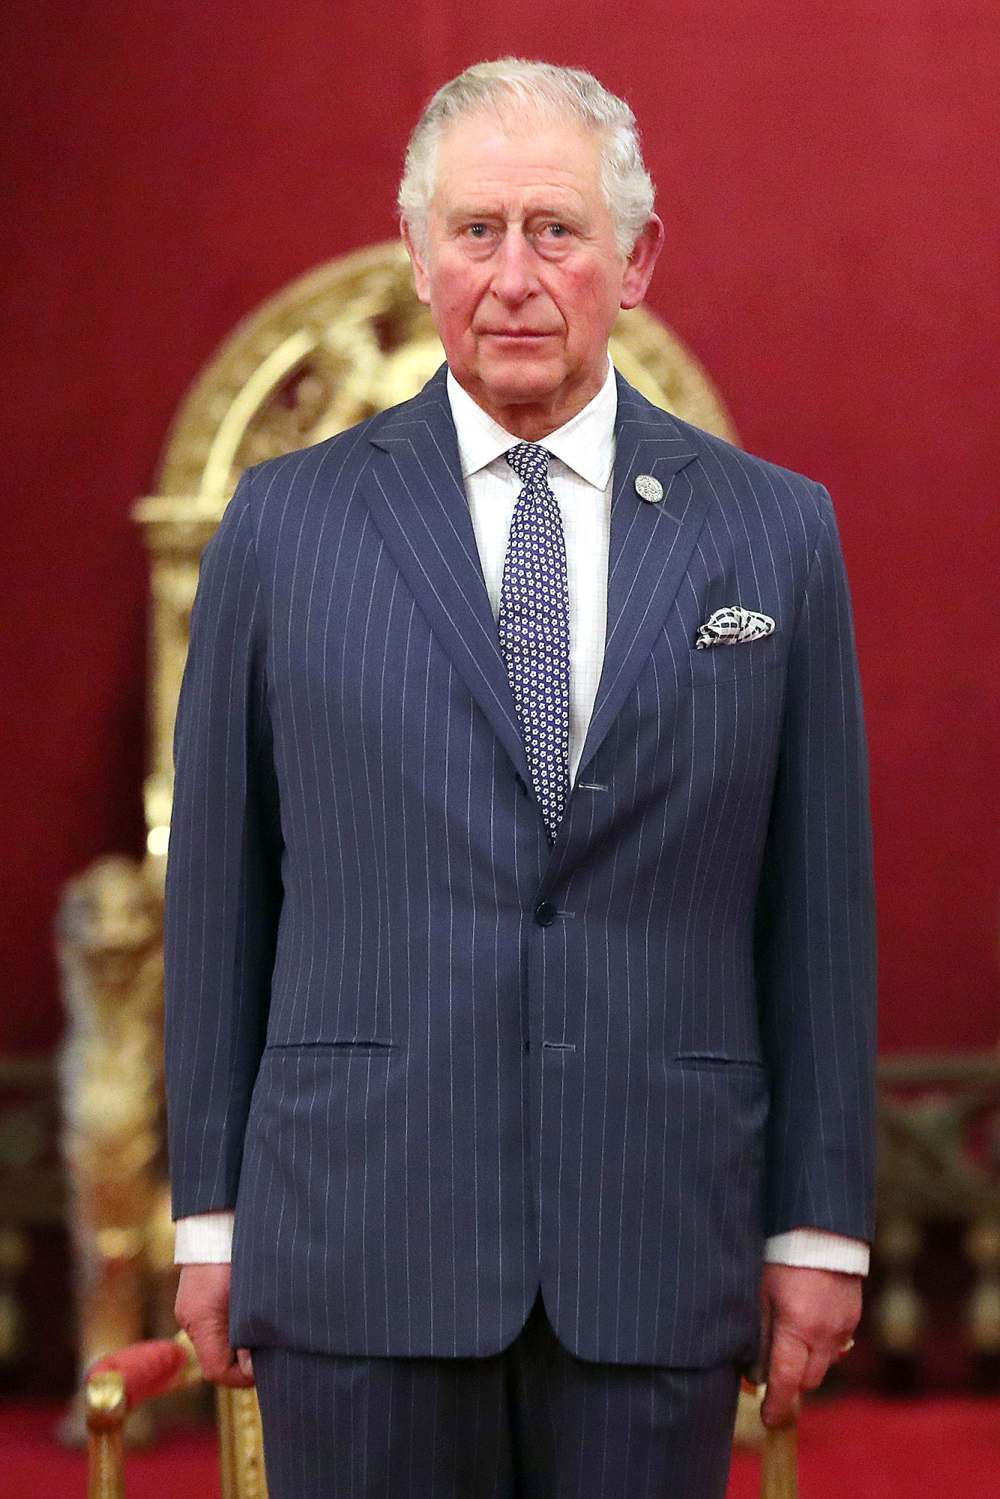 Prince Charles Speaks Out After Testing Positive for Coronavirus